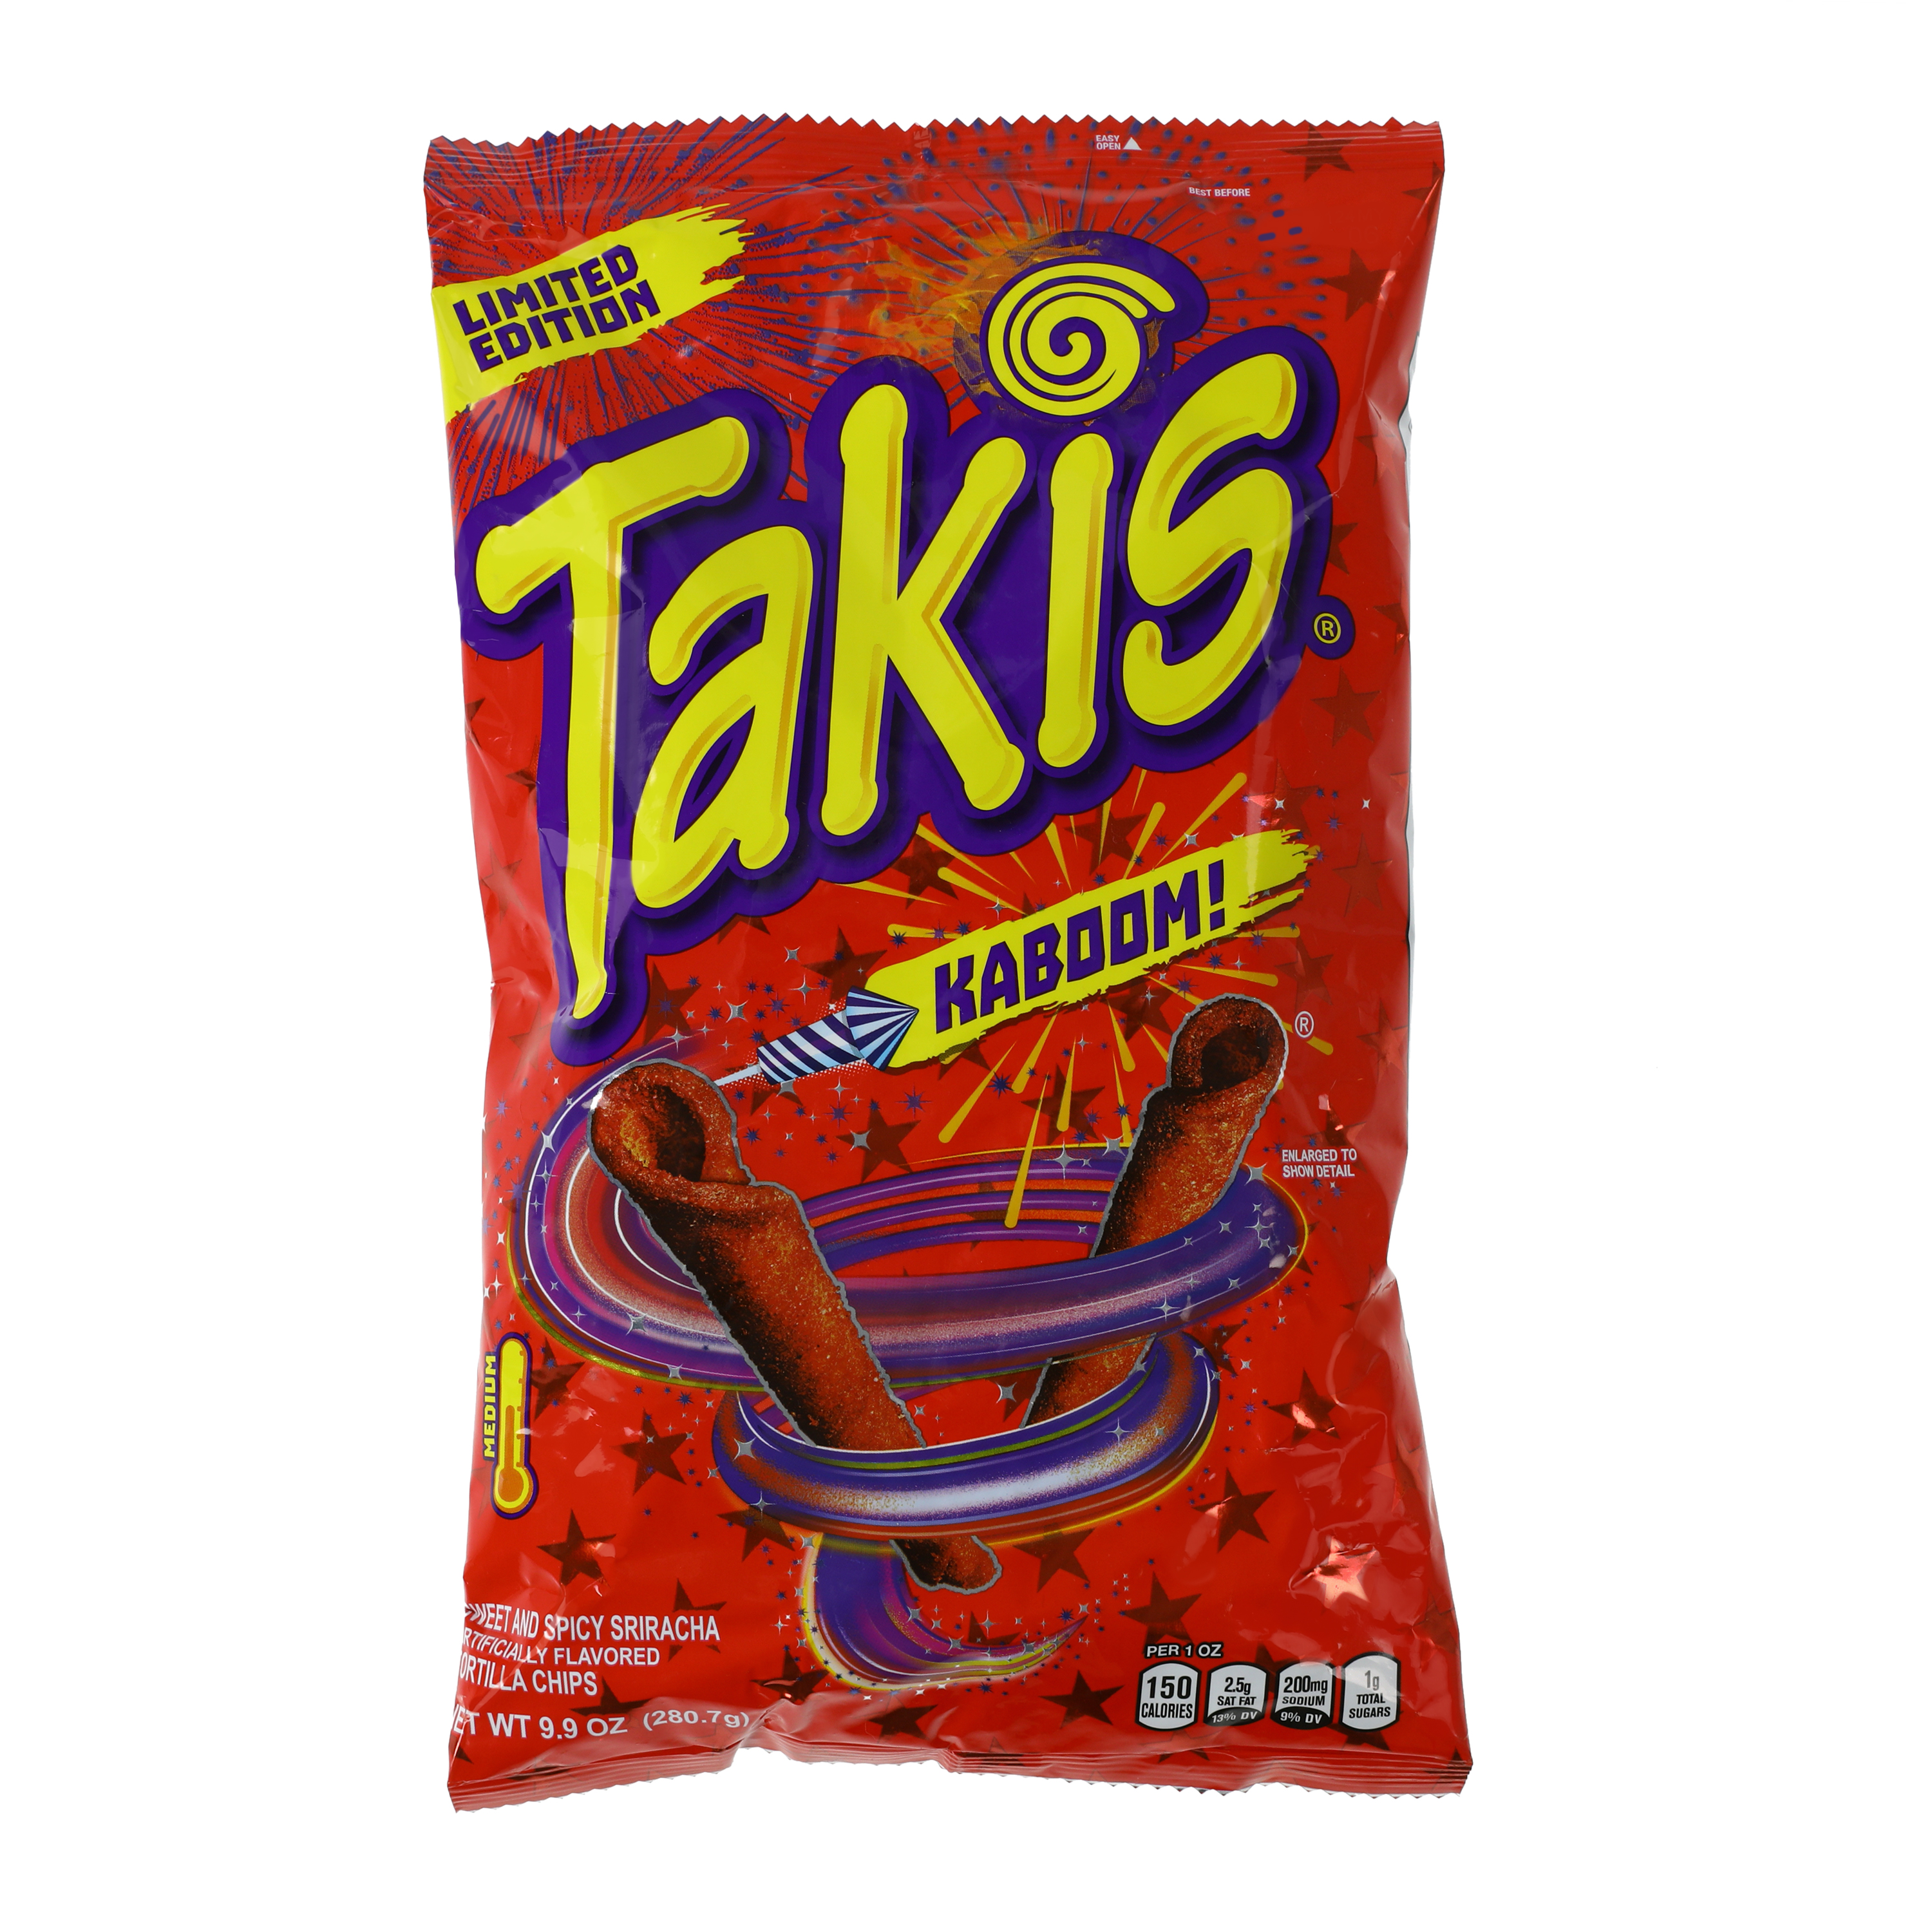 Takis® Kaboom! Limited Edition Rolled Tortilla Chips 9.9oz